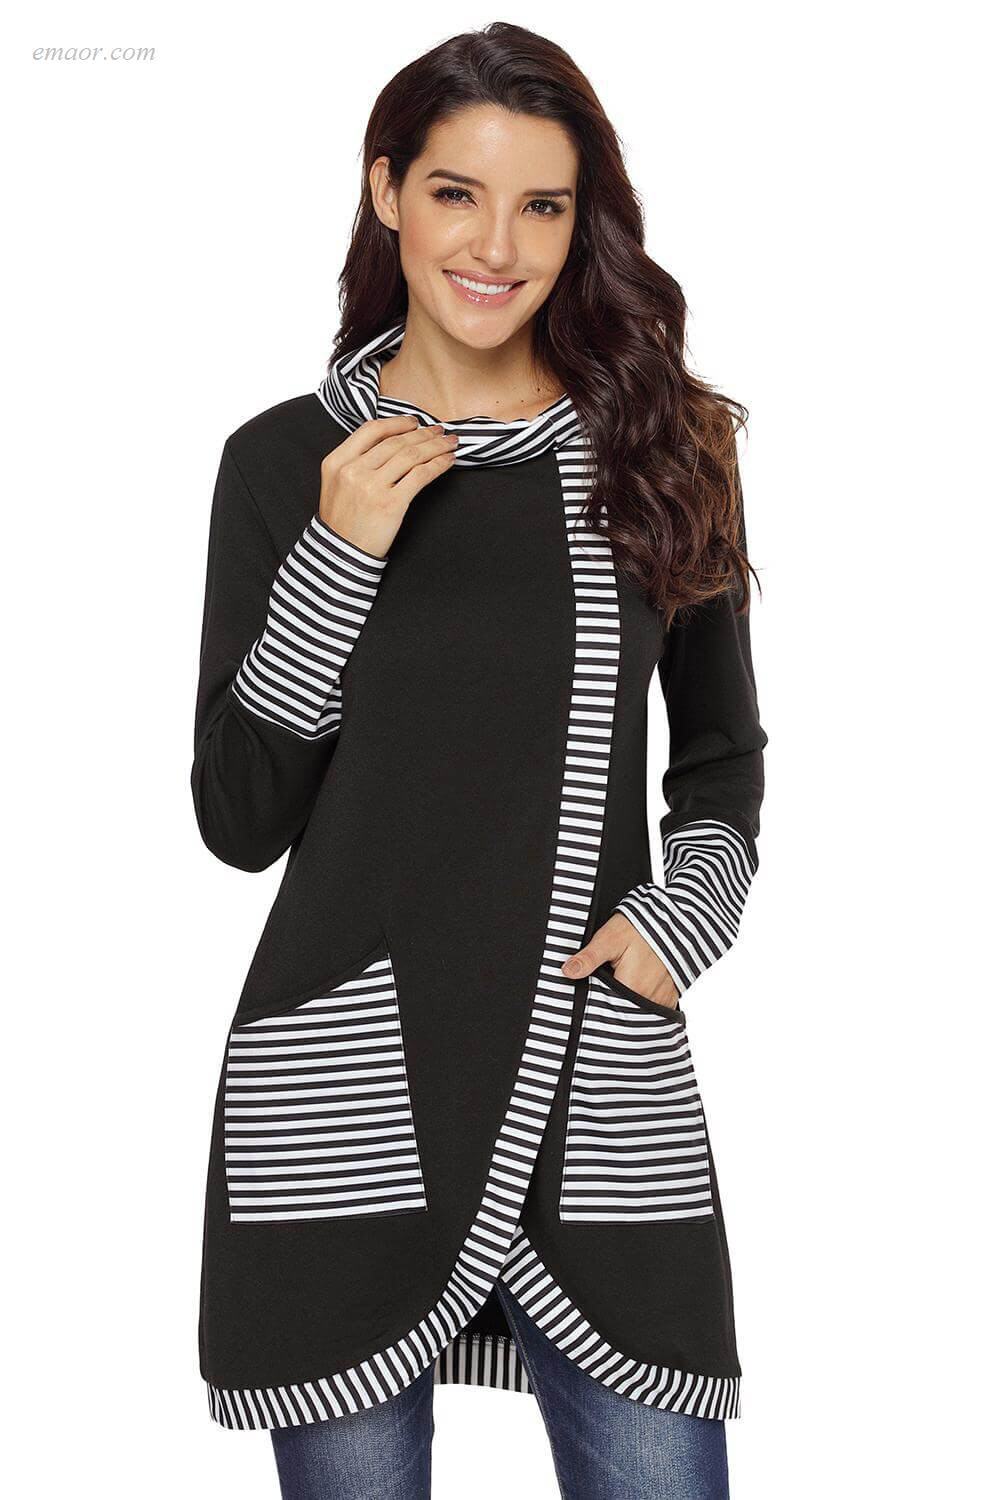 Wholesale Outerwear on Sale Striped Cowl Neck Top Free Country Outerwear Coupons Gallery Plus Size Outerwear